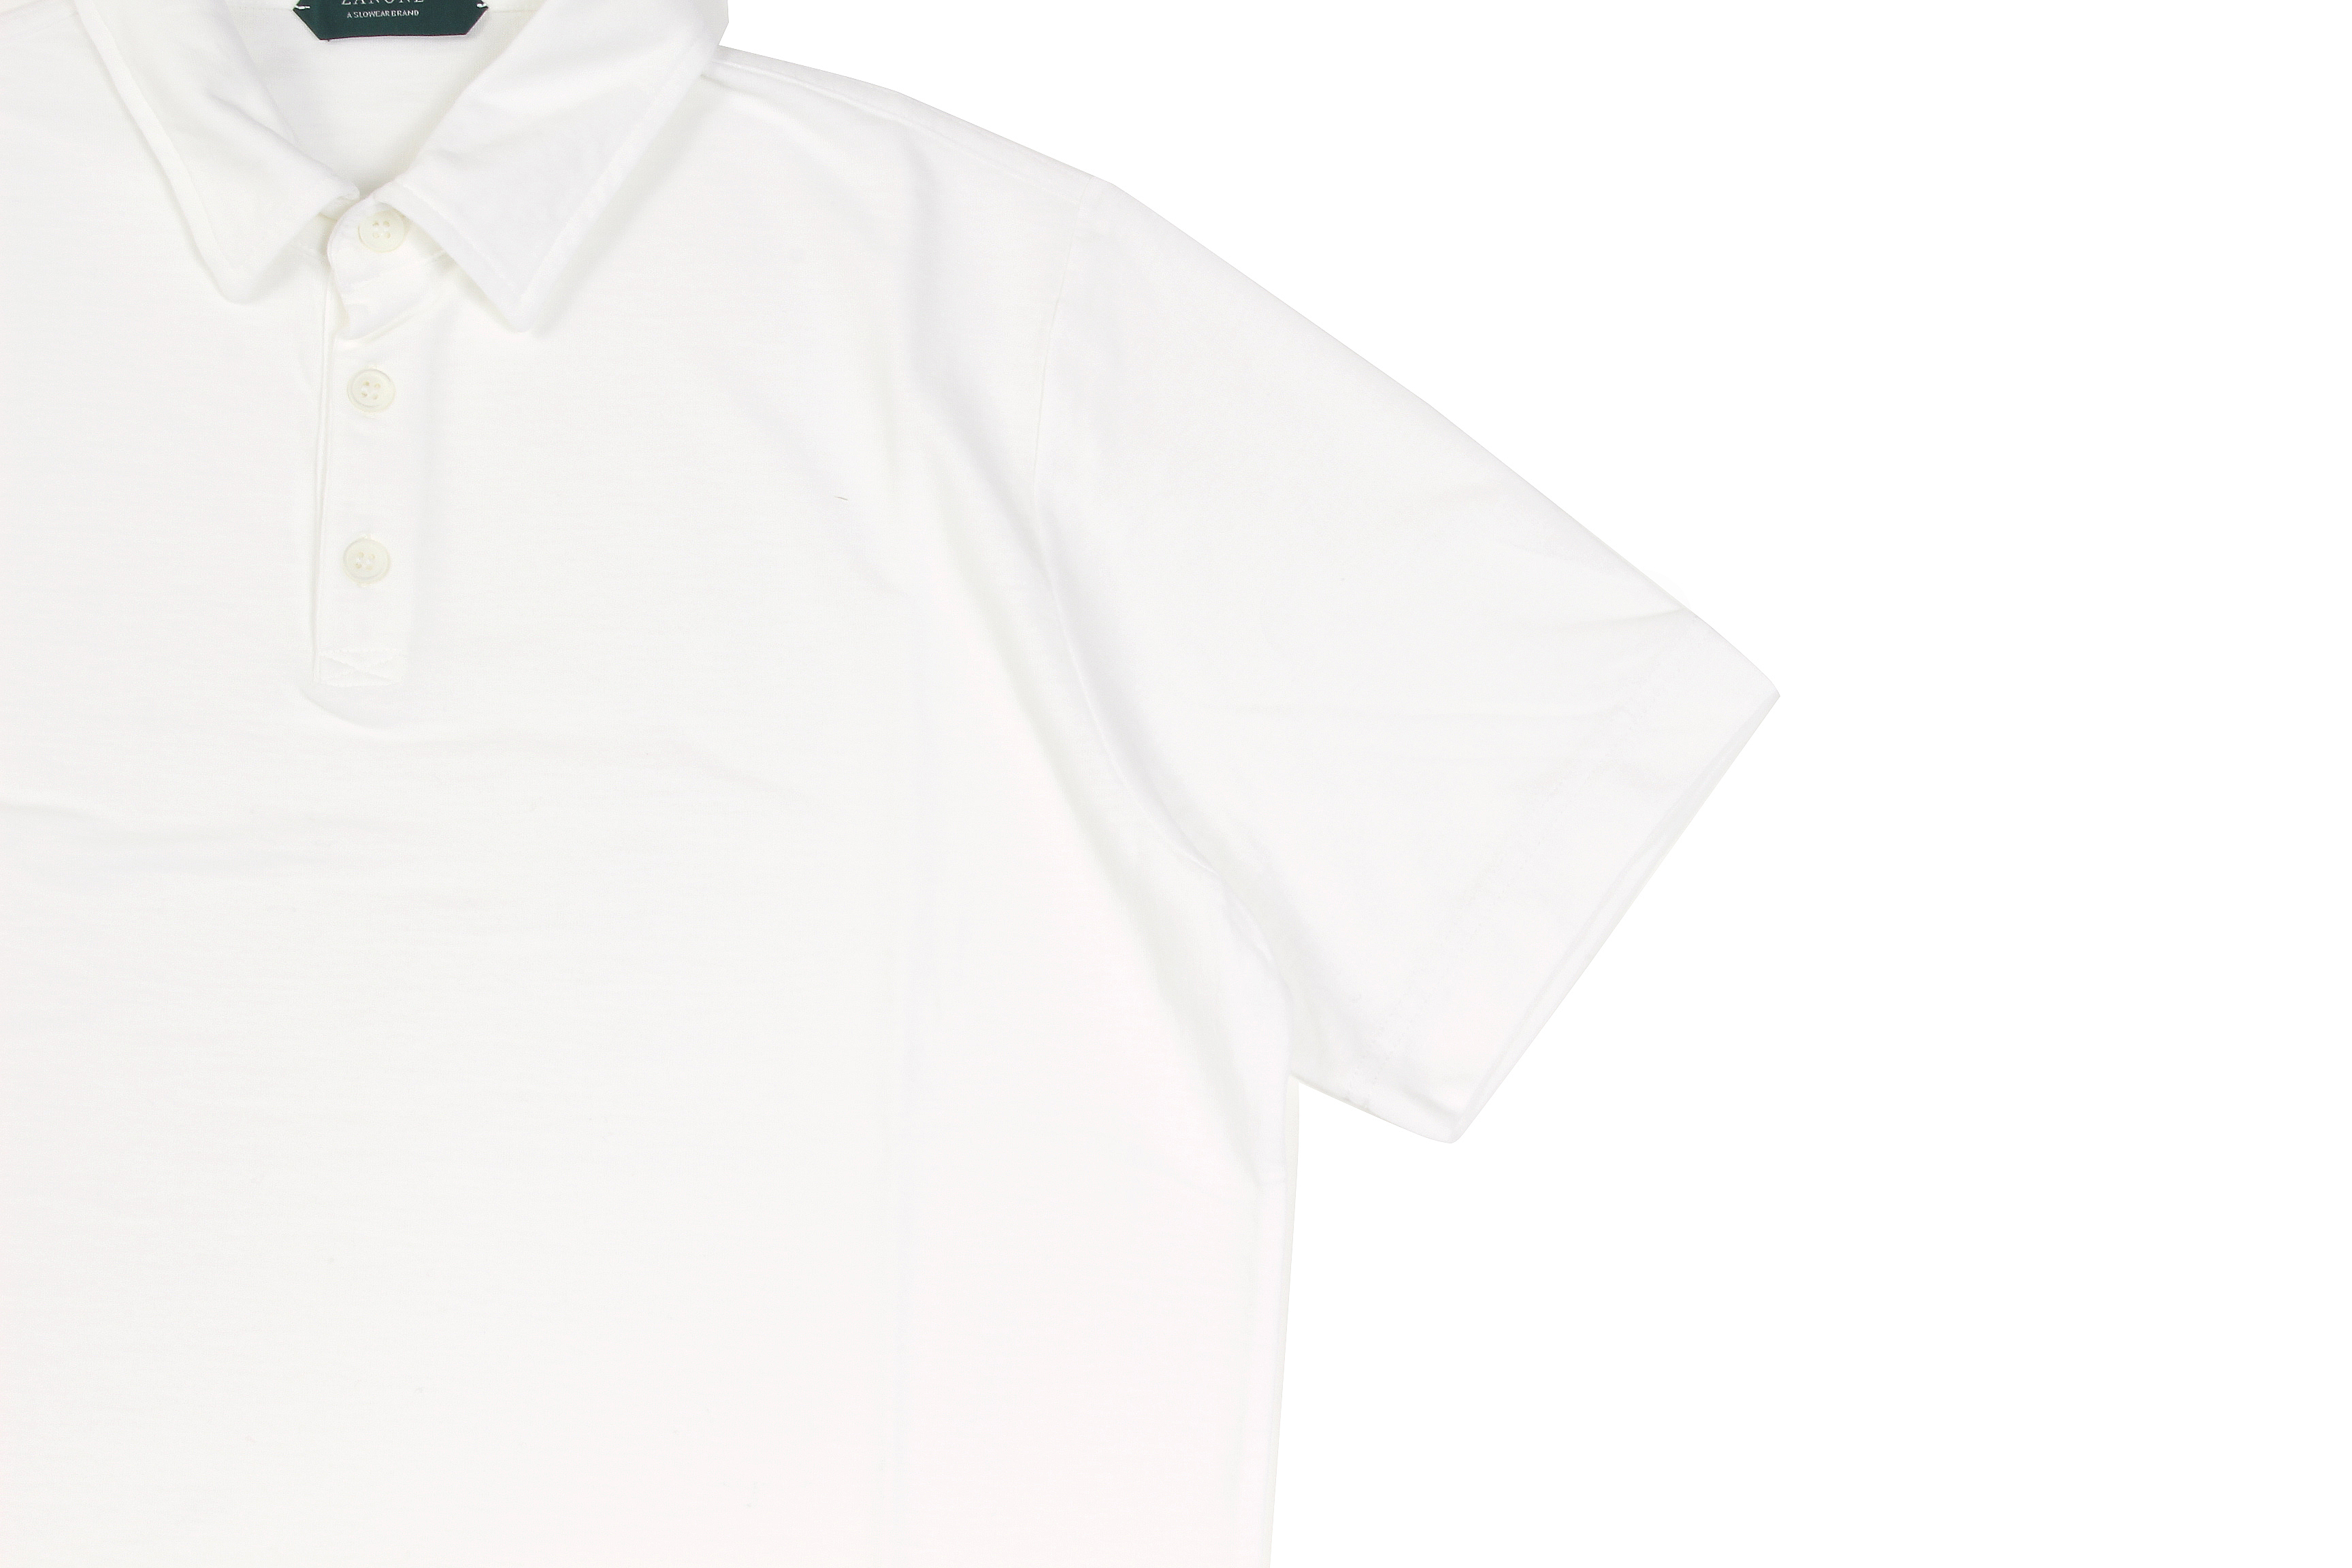 ZANONE(ザノーネ) Polo Shirt ice cotton アイスコットン ポロシャツ WHITE (ホワイト・Z0001) made in italy (イタリア製) 2020春夏新作 愛知 名古屋 altoediritto アルトエデリット